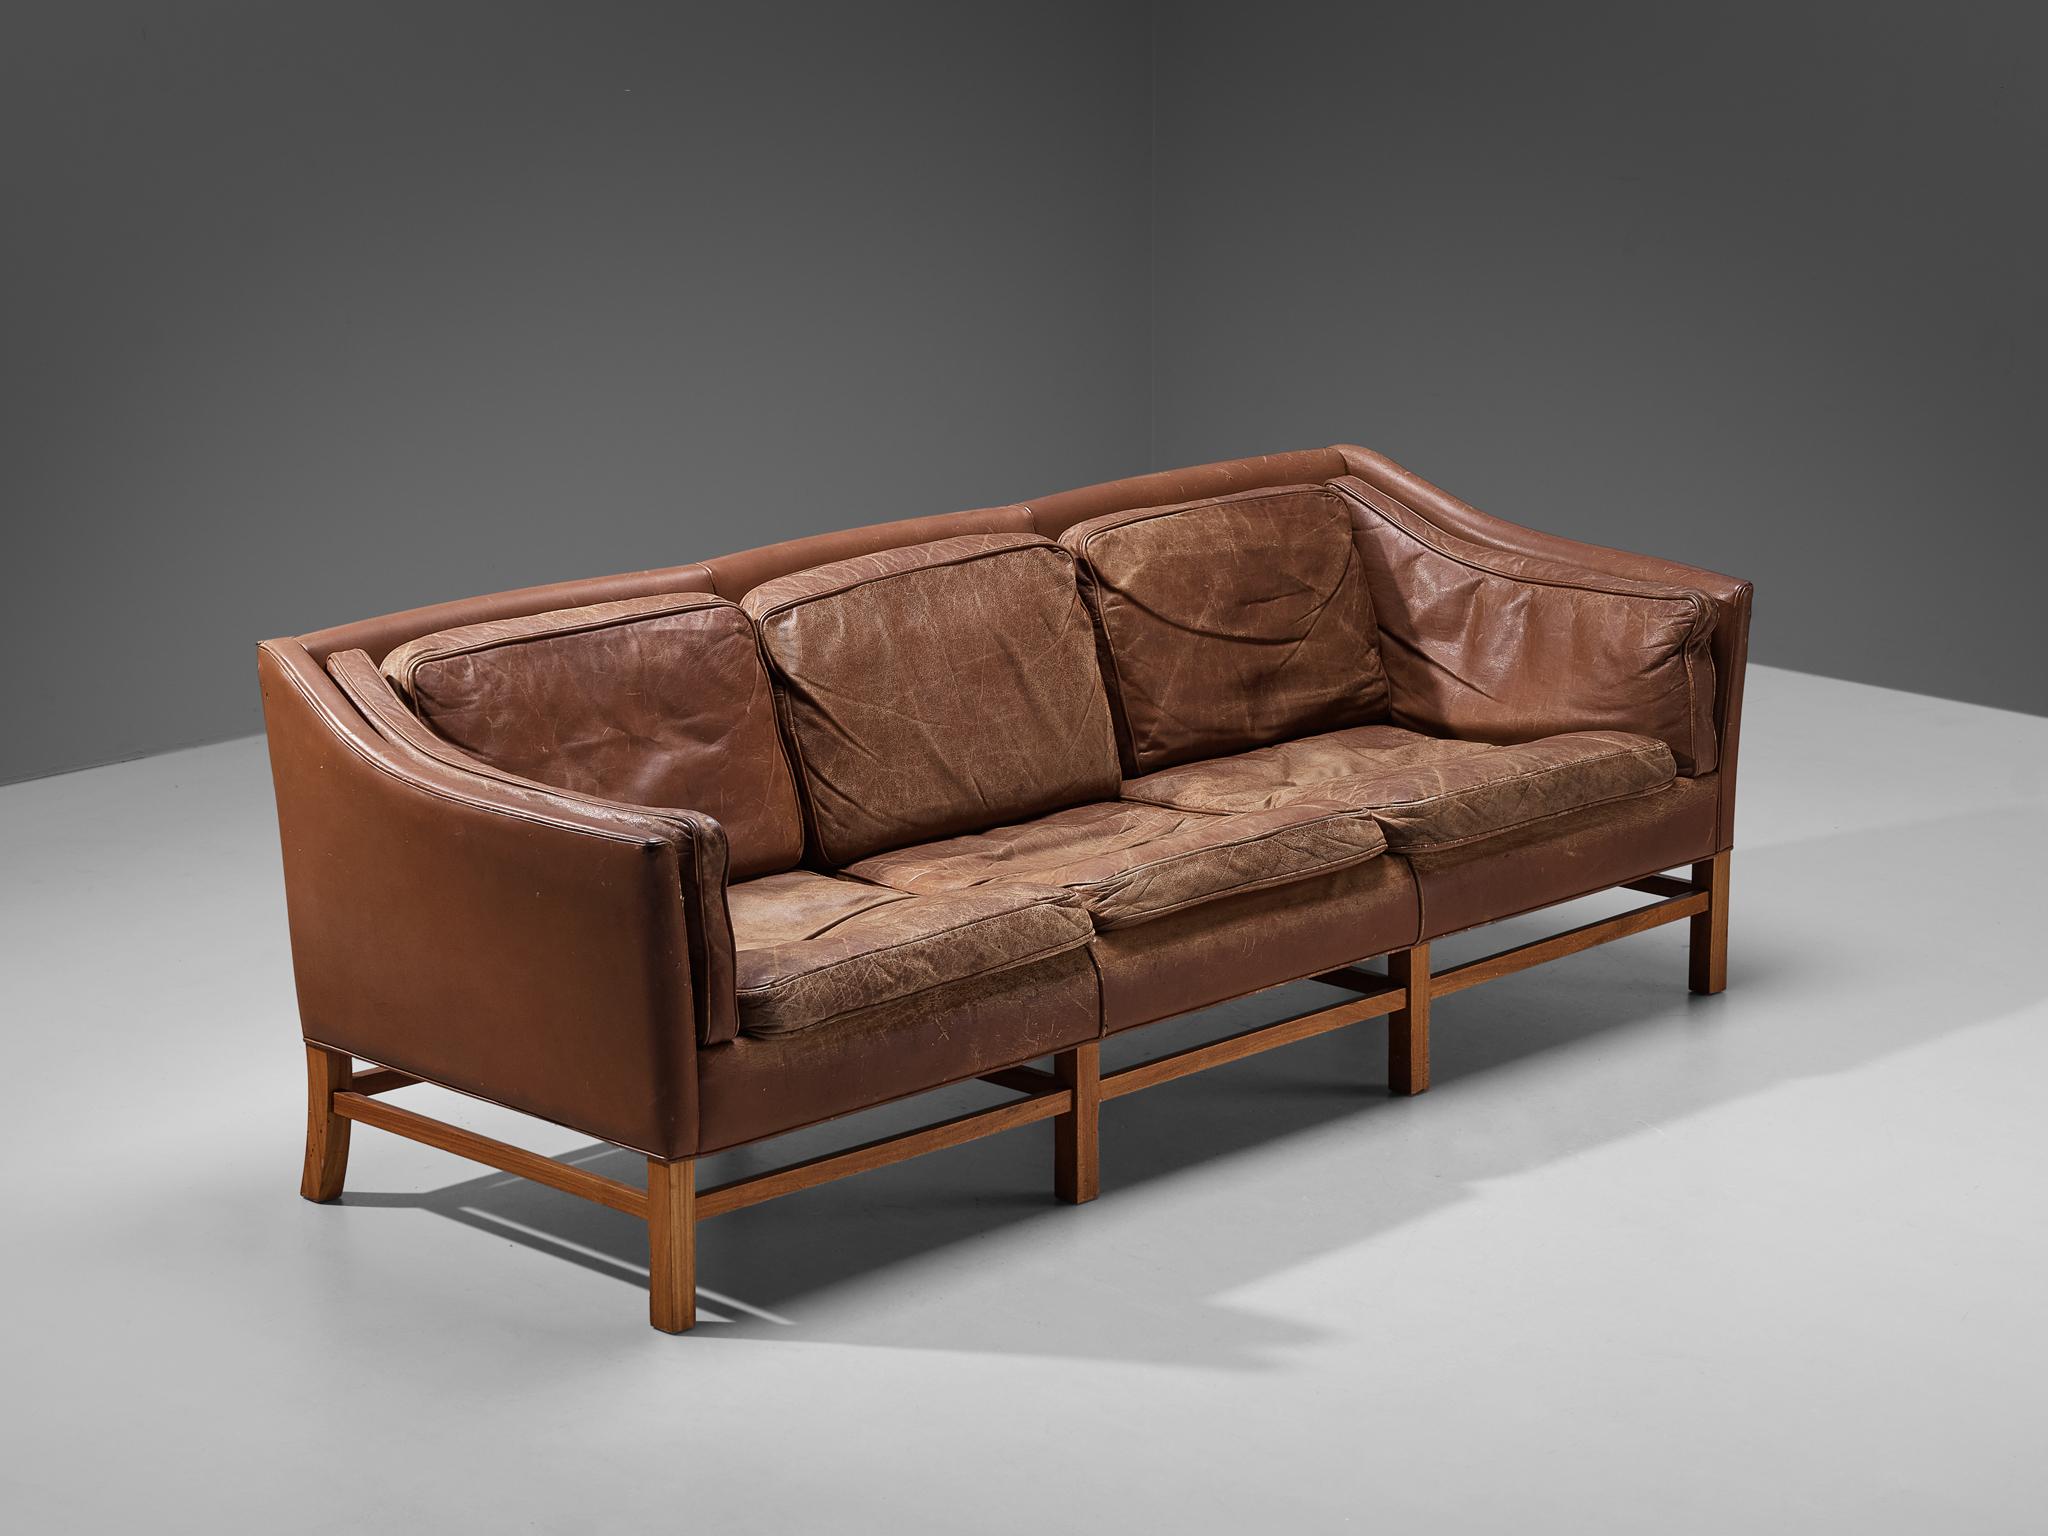 Sofa, brown leather, stained mahogany, Denmark, 1960s

This classic sofa of Danish origin features modest and subtle lines and shapes that emphasize the clear construction of the design. The sofa rests on a well-proportioned base that lifts the